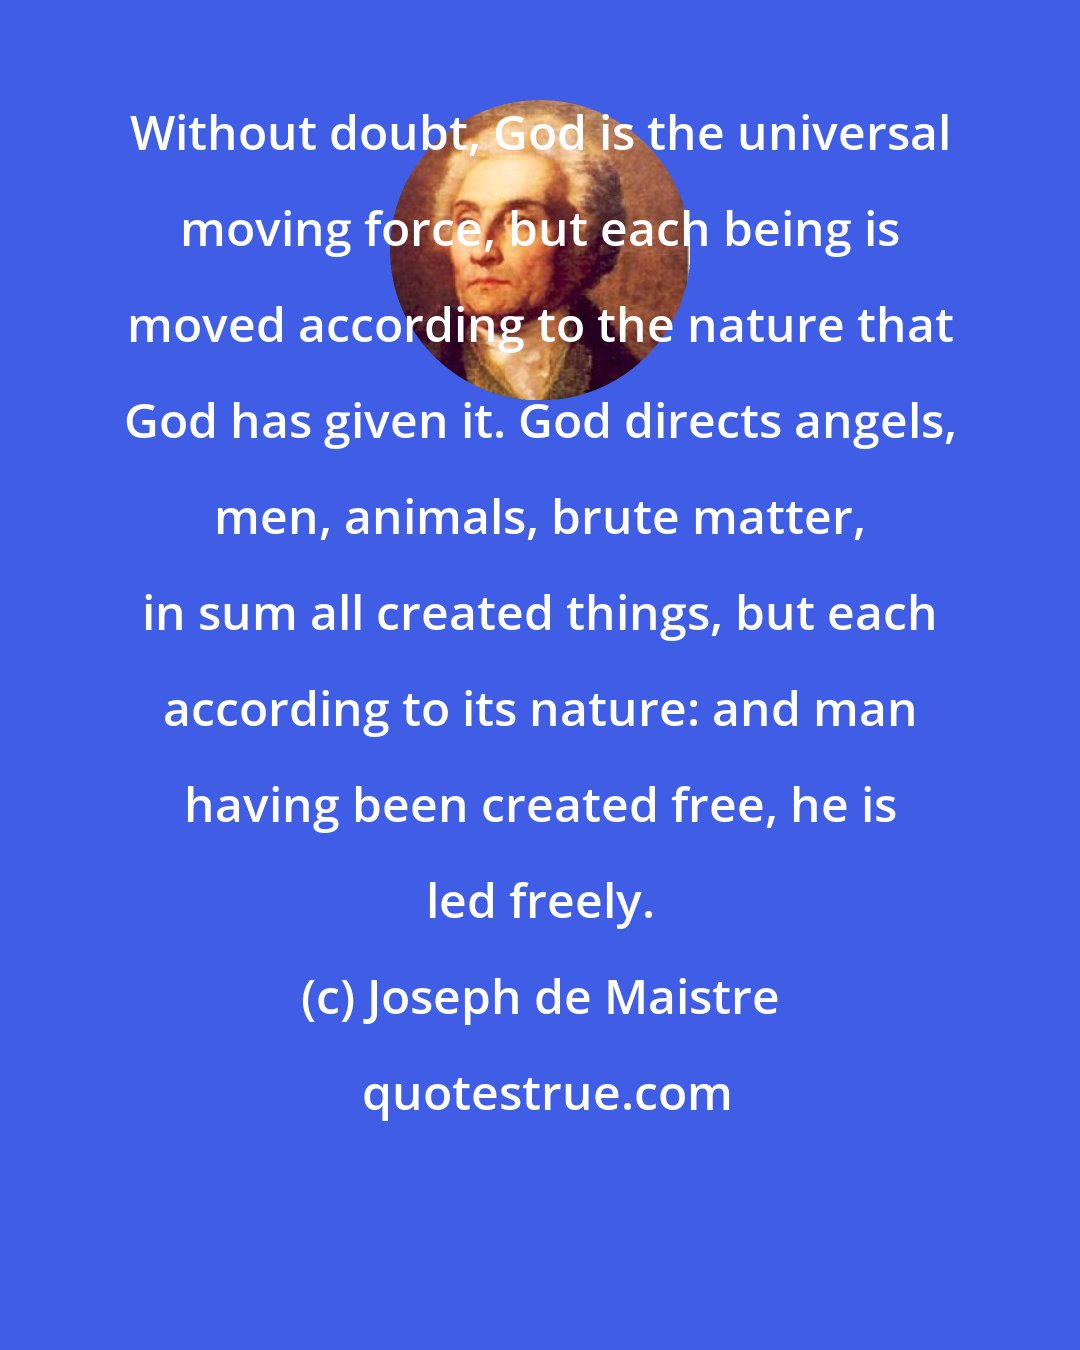 Joseph de Maistre: Without doubt, God is the universal moving force, but each being is moved according to the nature that God has given it. God directs angels, men, animals, brute matter, in sum all created things, but each according to its nature: and man having been created free, he is led freely.